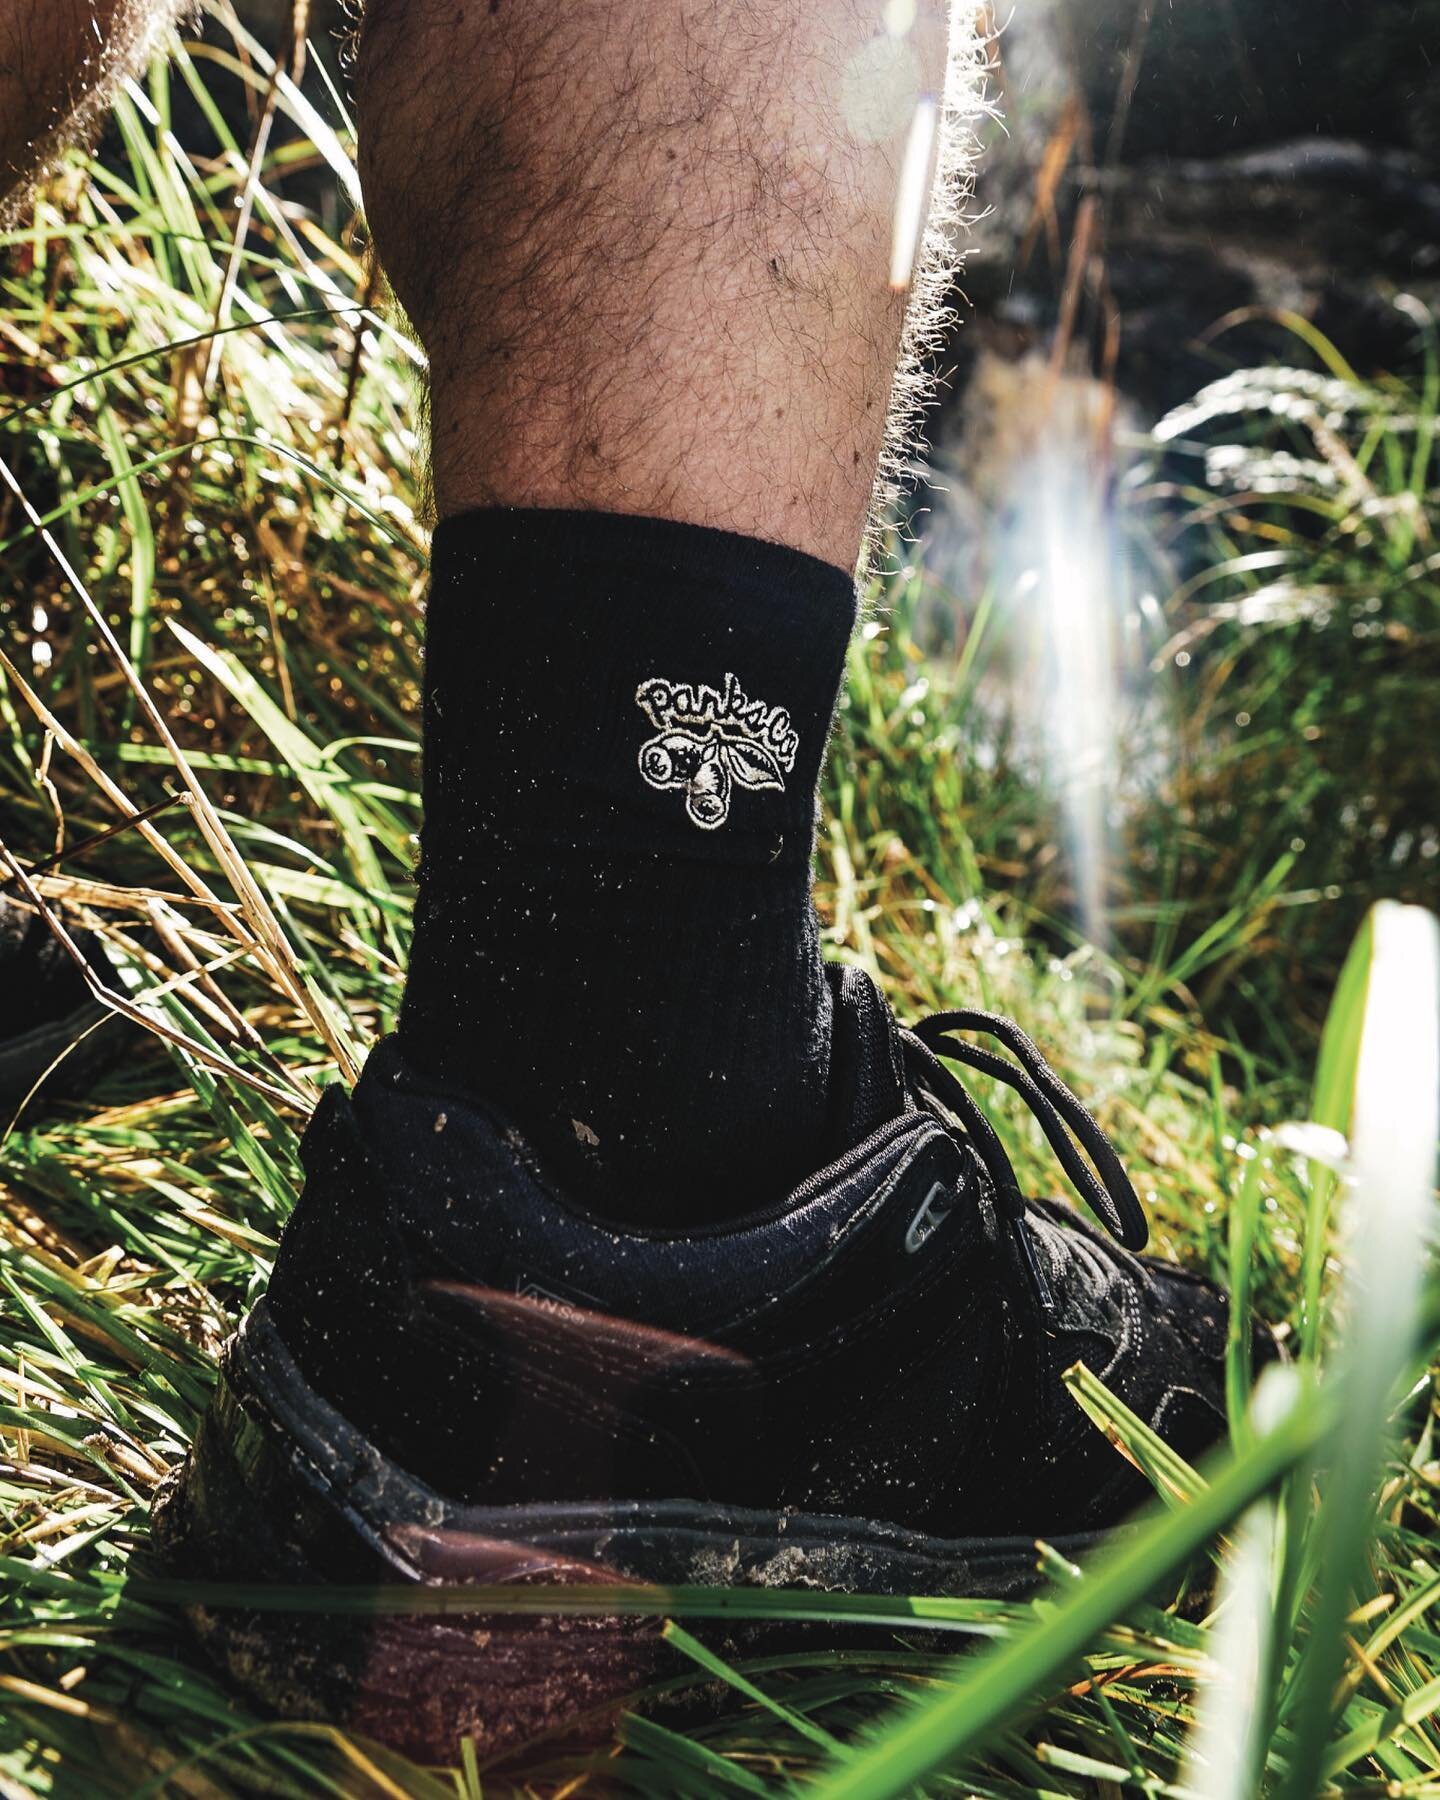 Treat your feet with our Walkabout organic cotton socks. 

Pack of three pairs in mixed or raven, guaranteed your hoovs will love them.

FEATURES:
Mid profile crew sock, Organic cotton, Moisture wicking, Half terry footbed, Arch support &amp; breatha